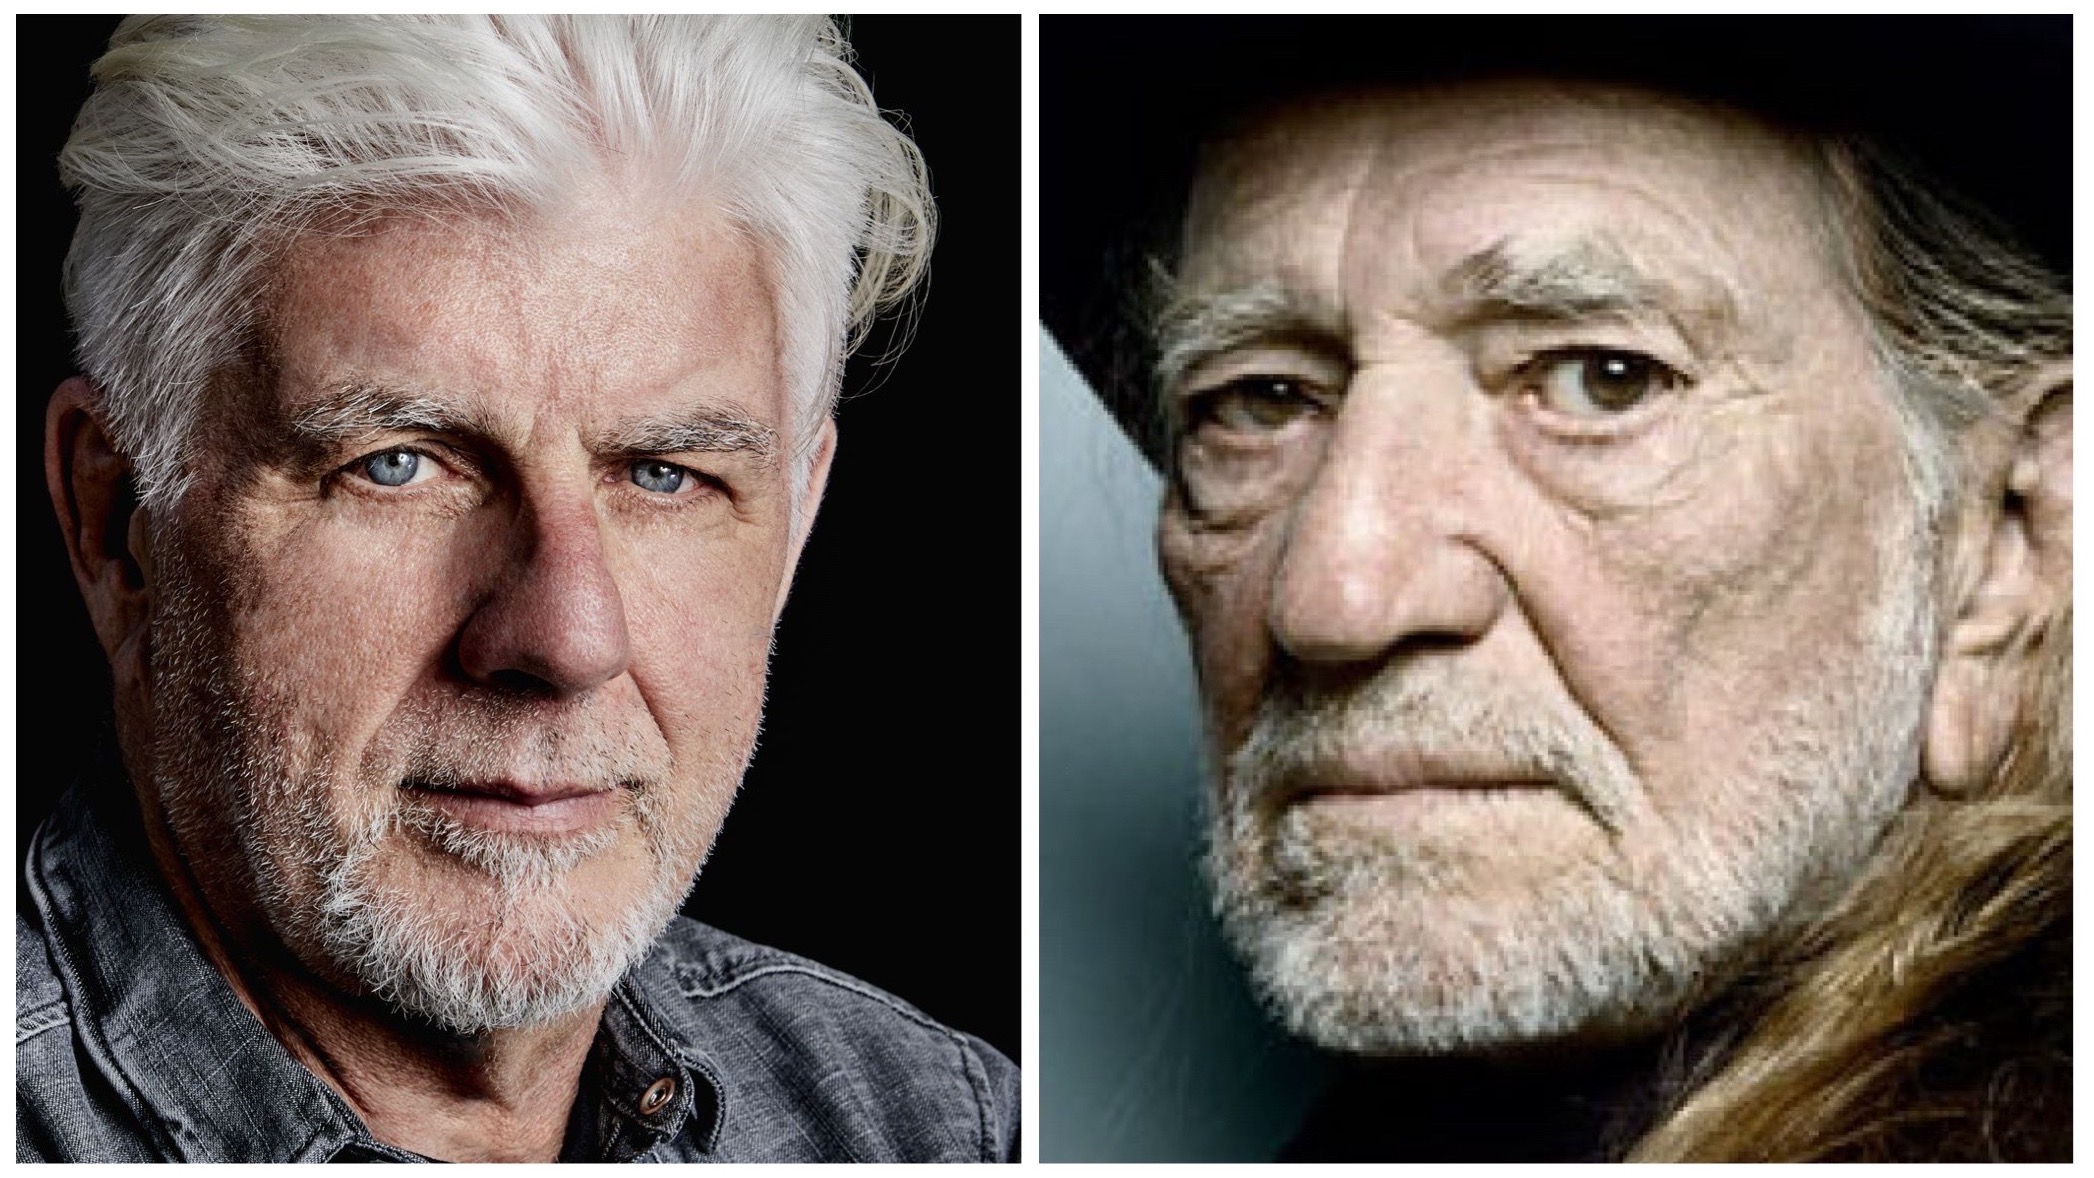 Michael McDonald and Willie Nelson